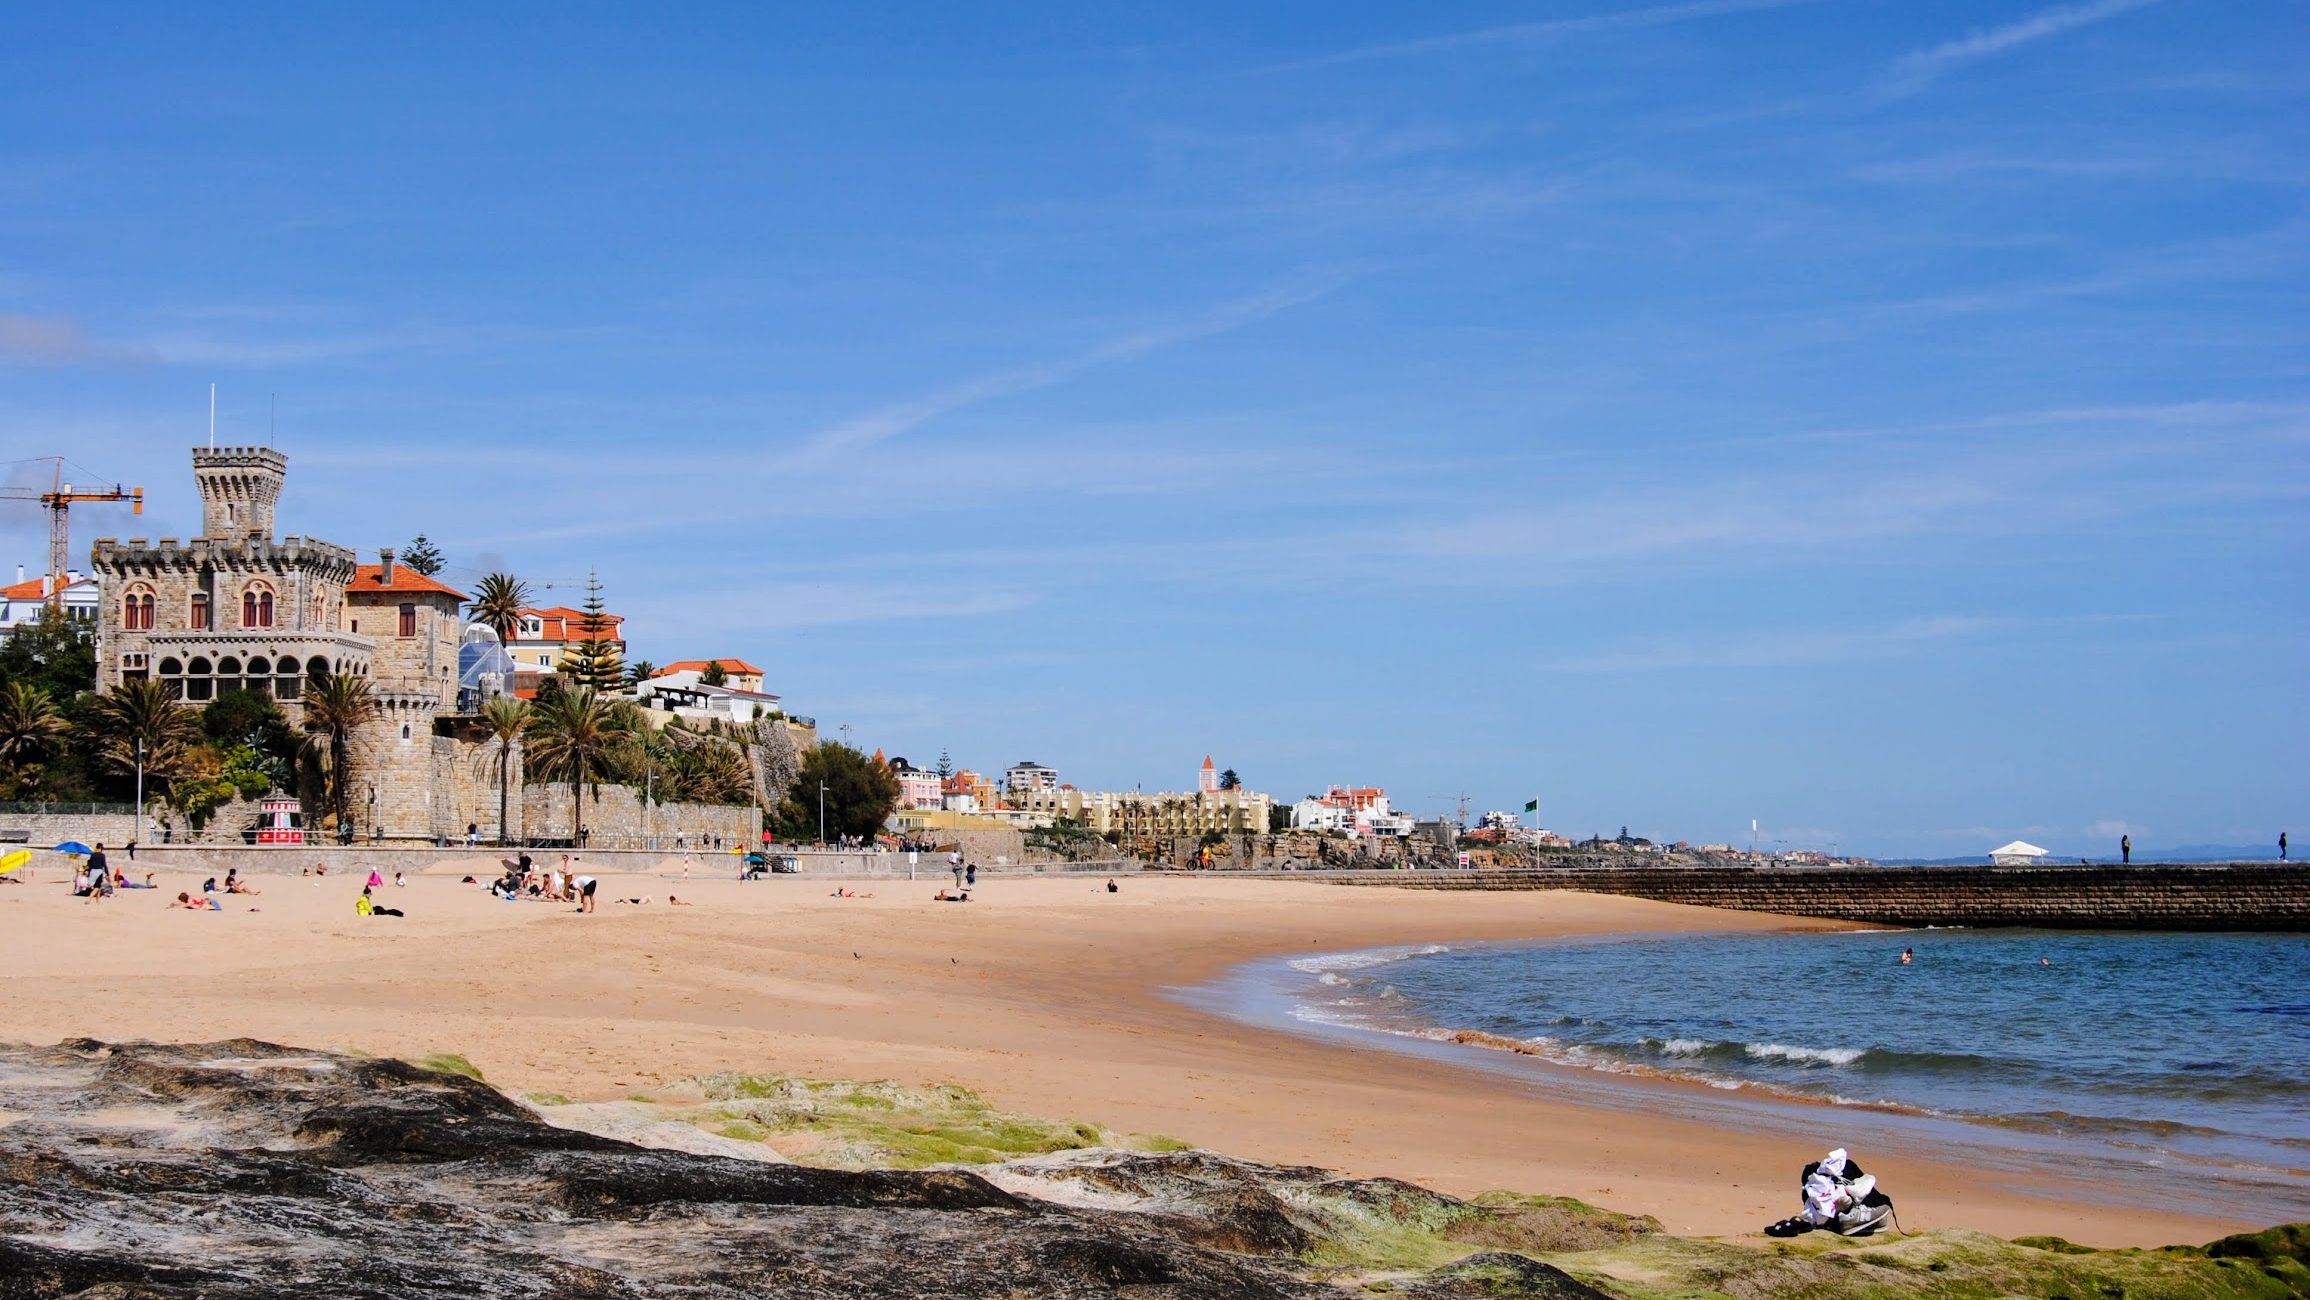 A beach in Portugal with a fortress in the background